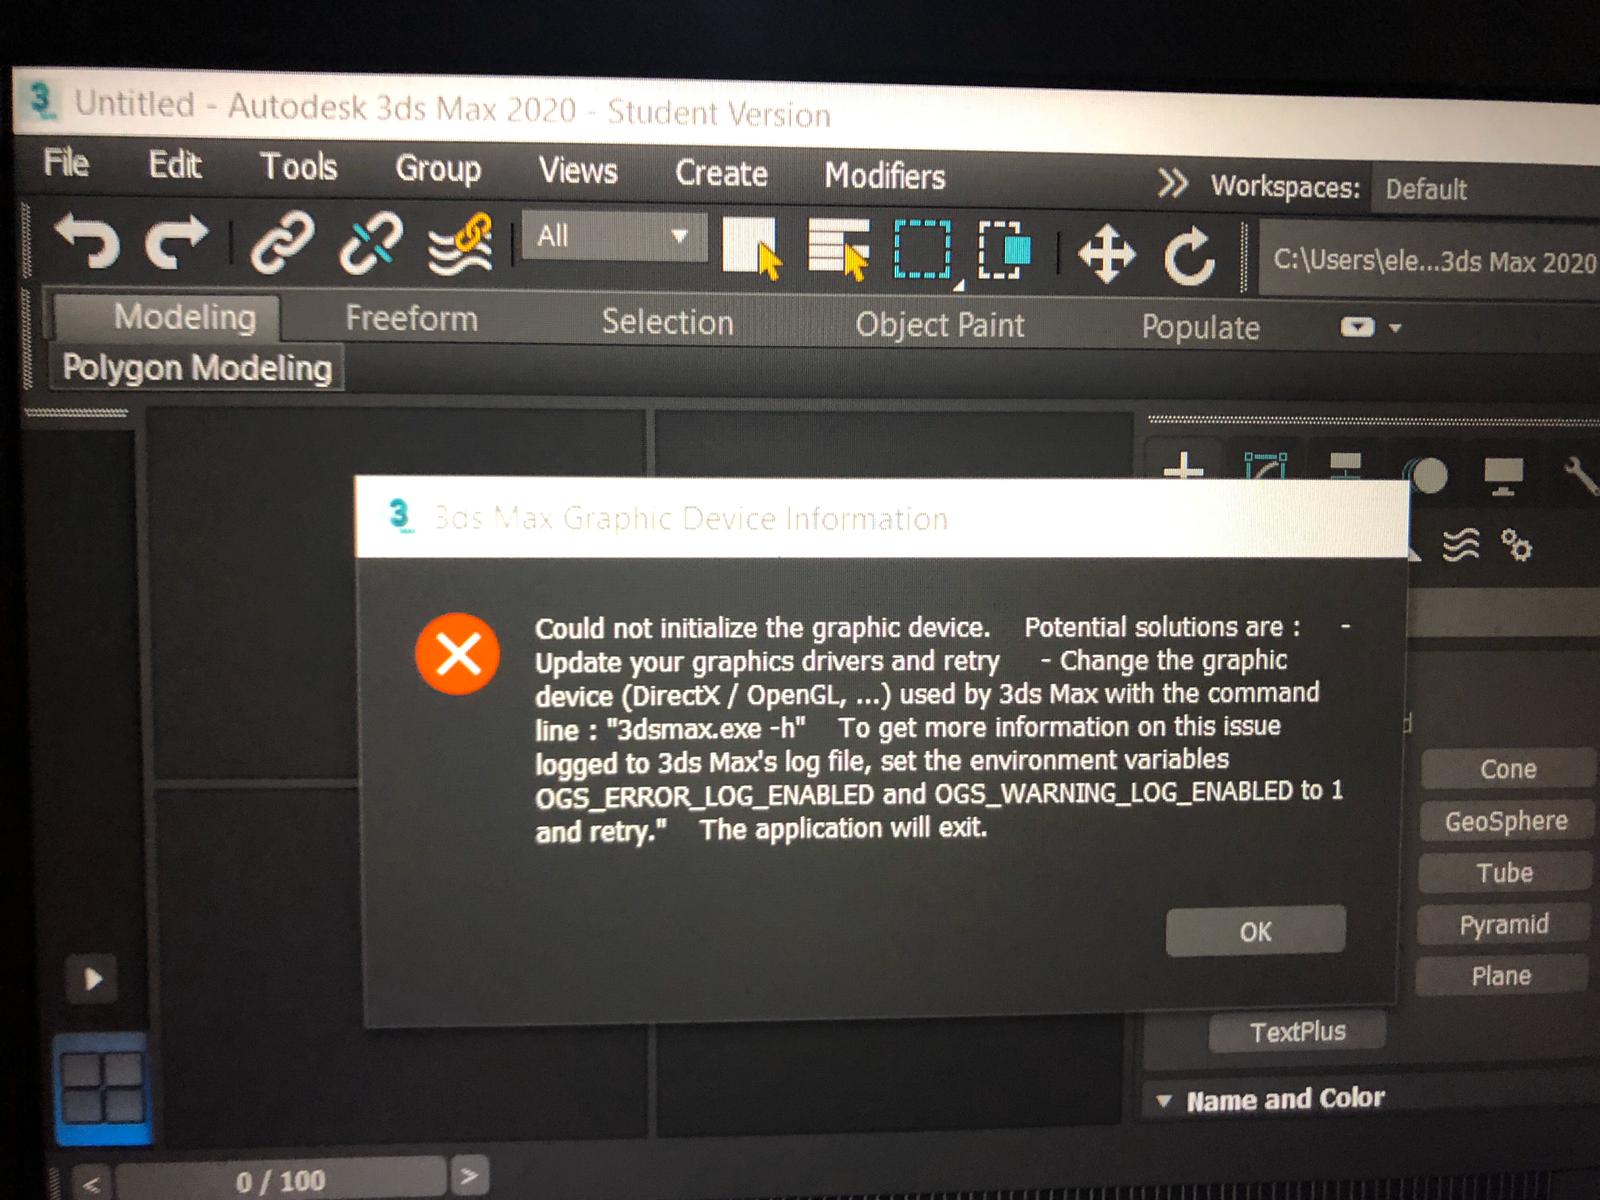 3ds Max 2020 "could not initialize the graphic device" - Autodesk Community  - 3ds Max